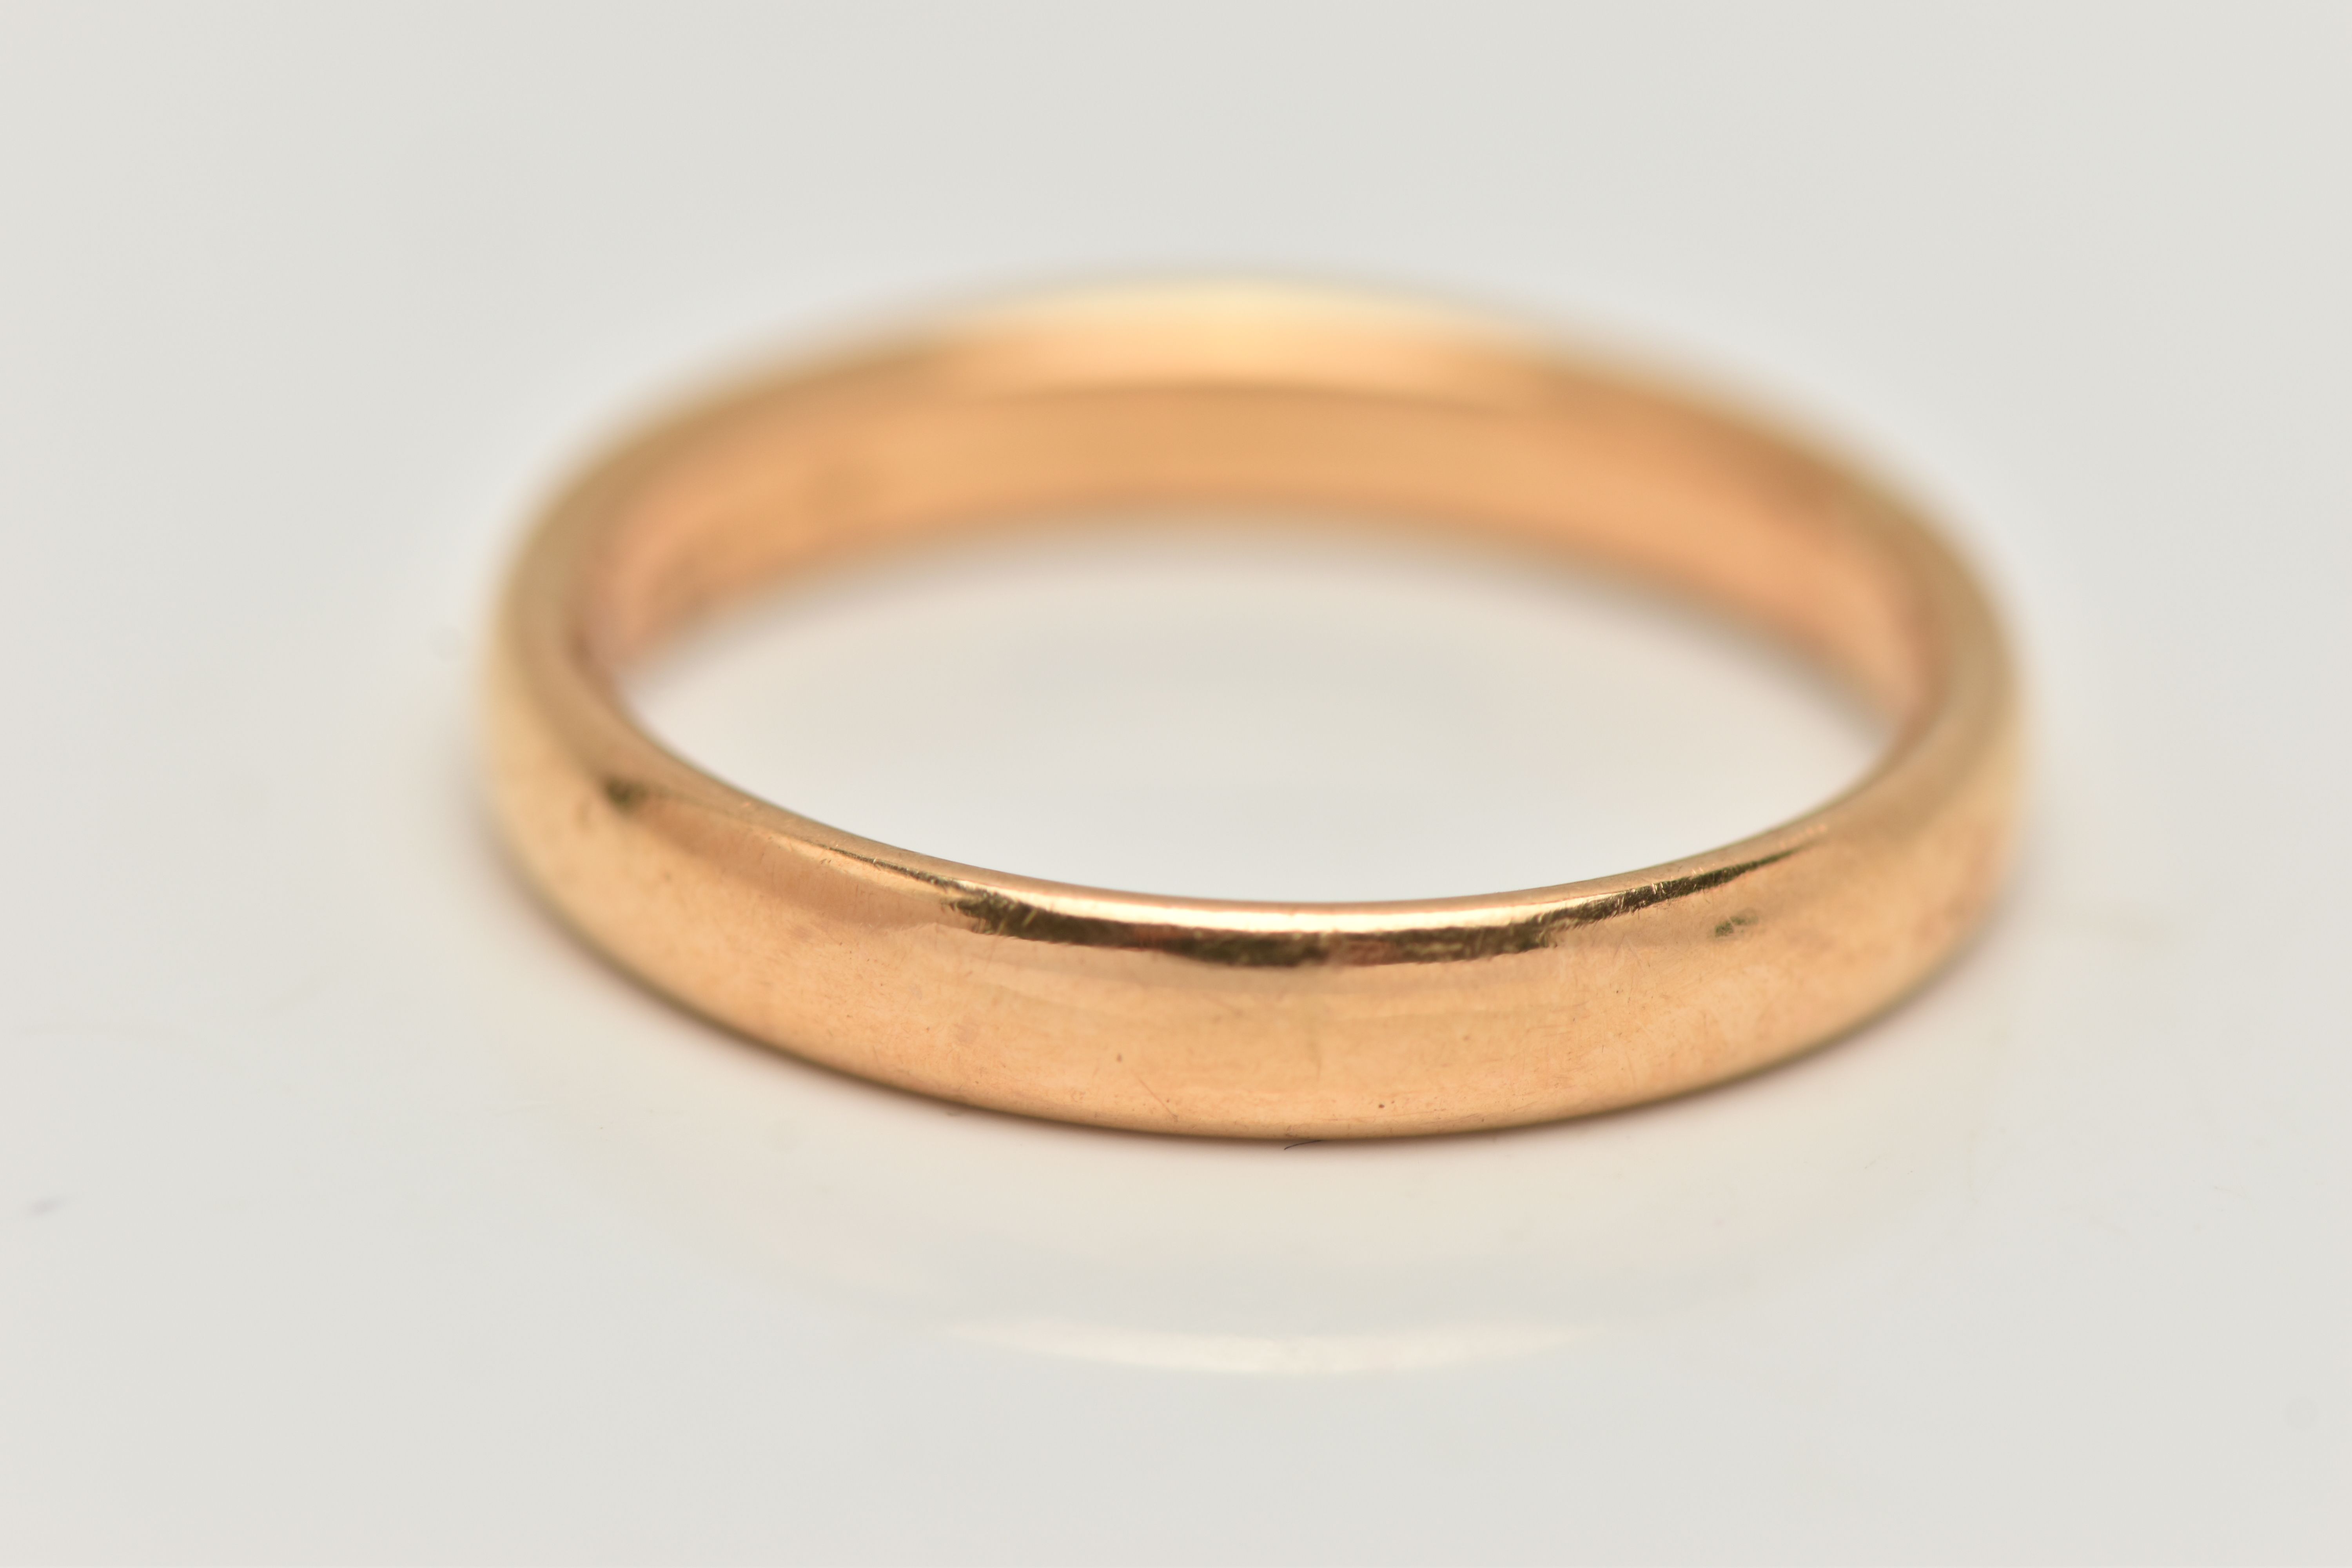 A YELLOW METAL BAND RING, polished band, unmarked, ring size N 1/2, approximate gross weight 4.8 - Image 2 of 2